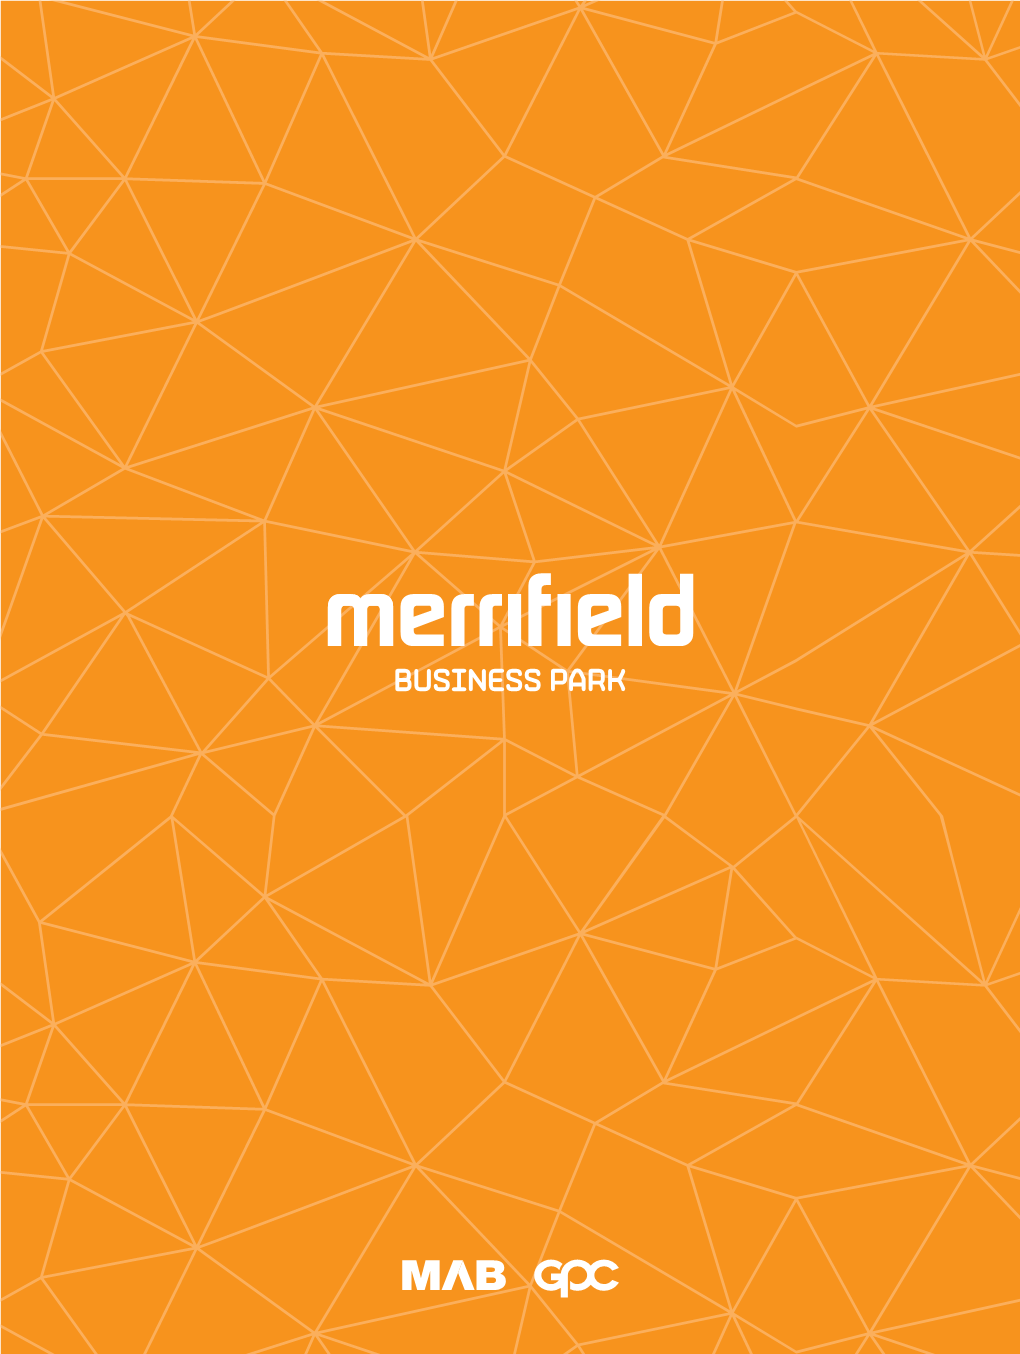 Please Click Here to See the Merrifield